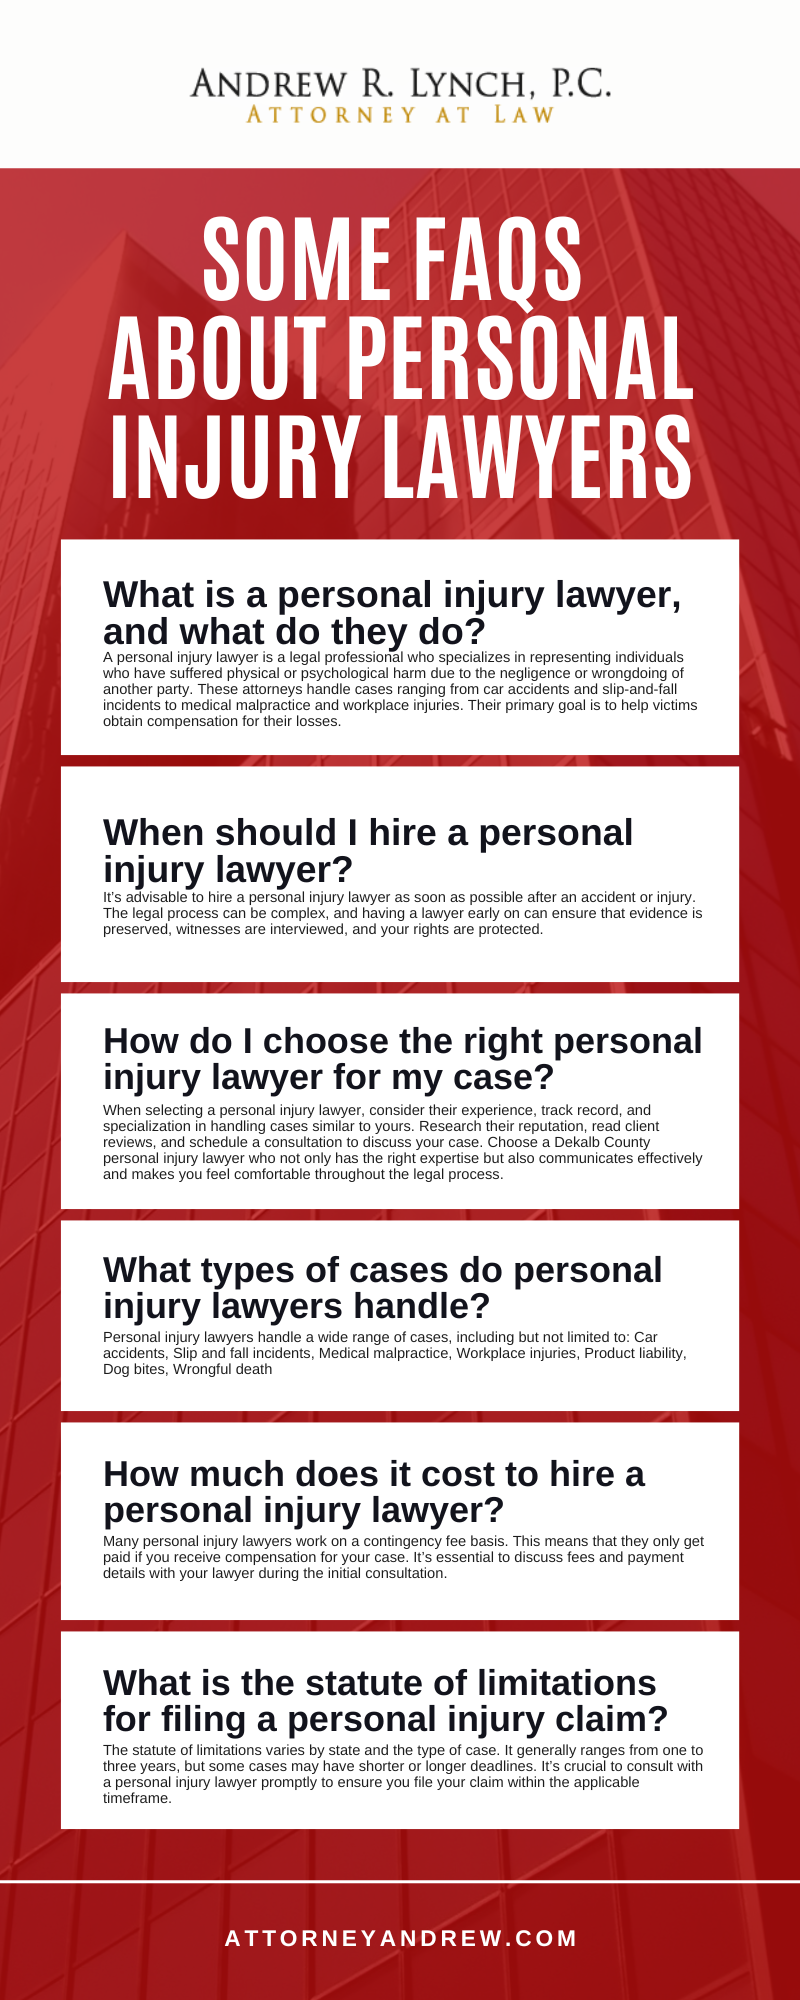 Some FAQs About Personal Injury Lawyers Infographic